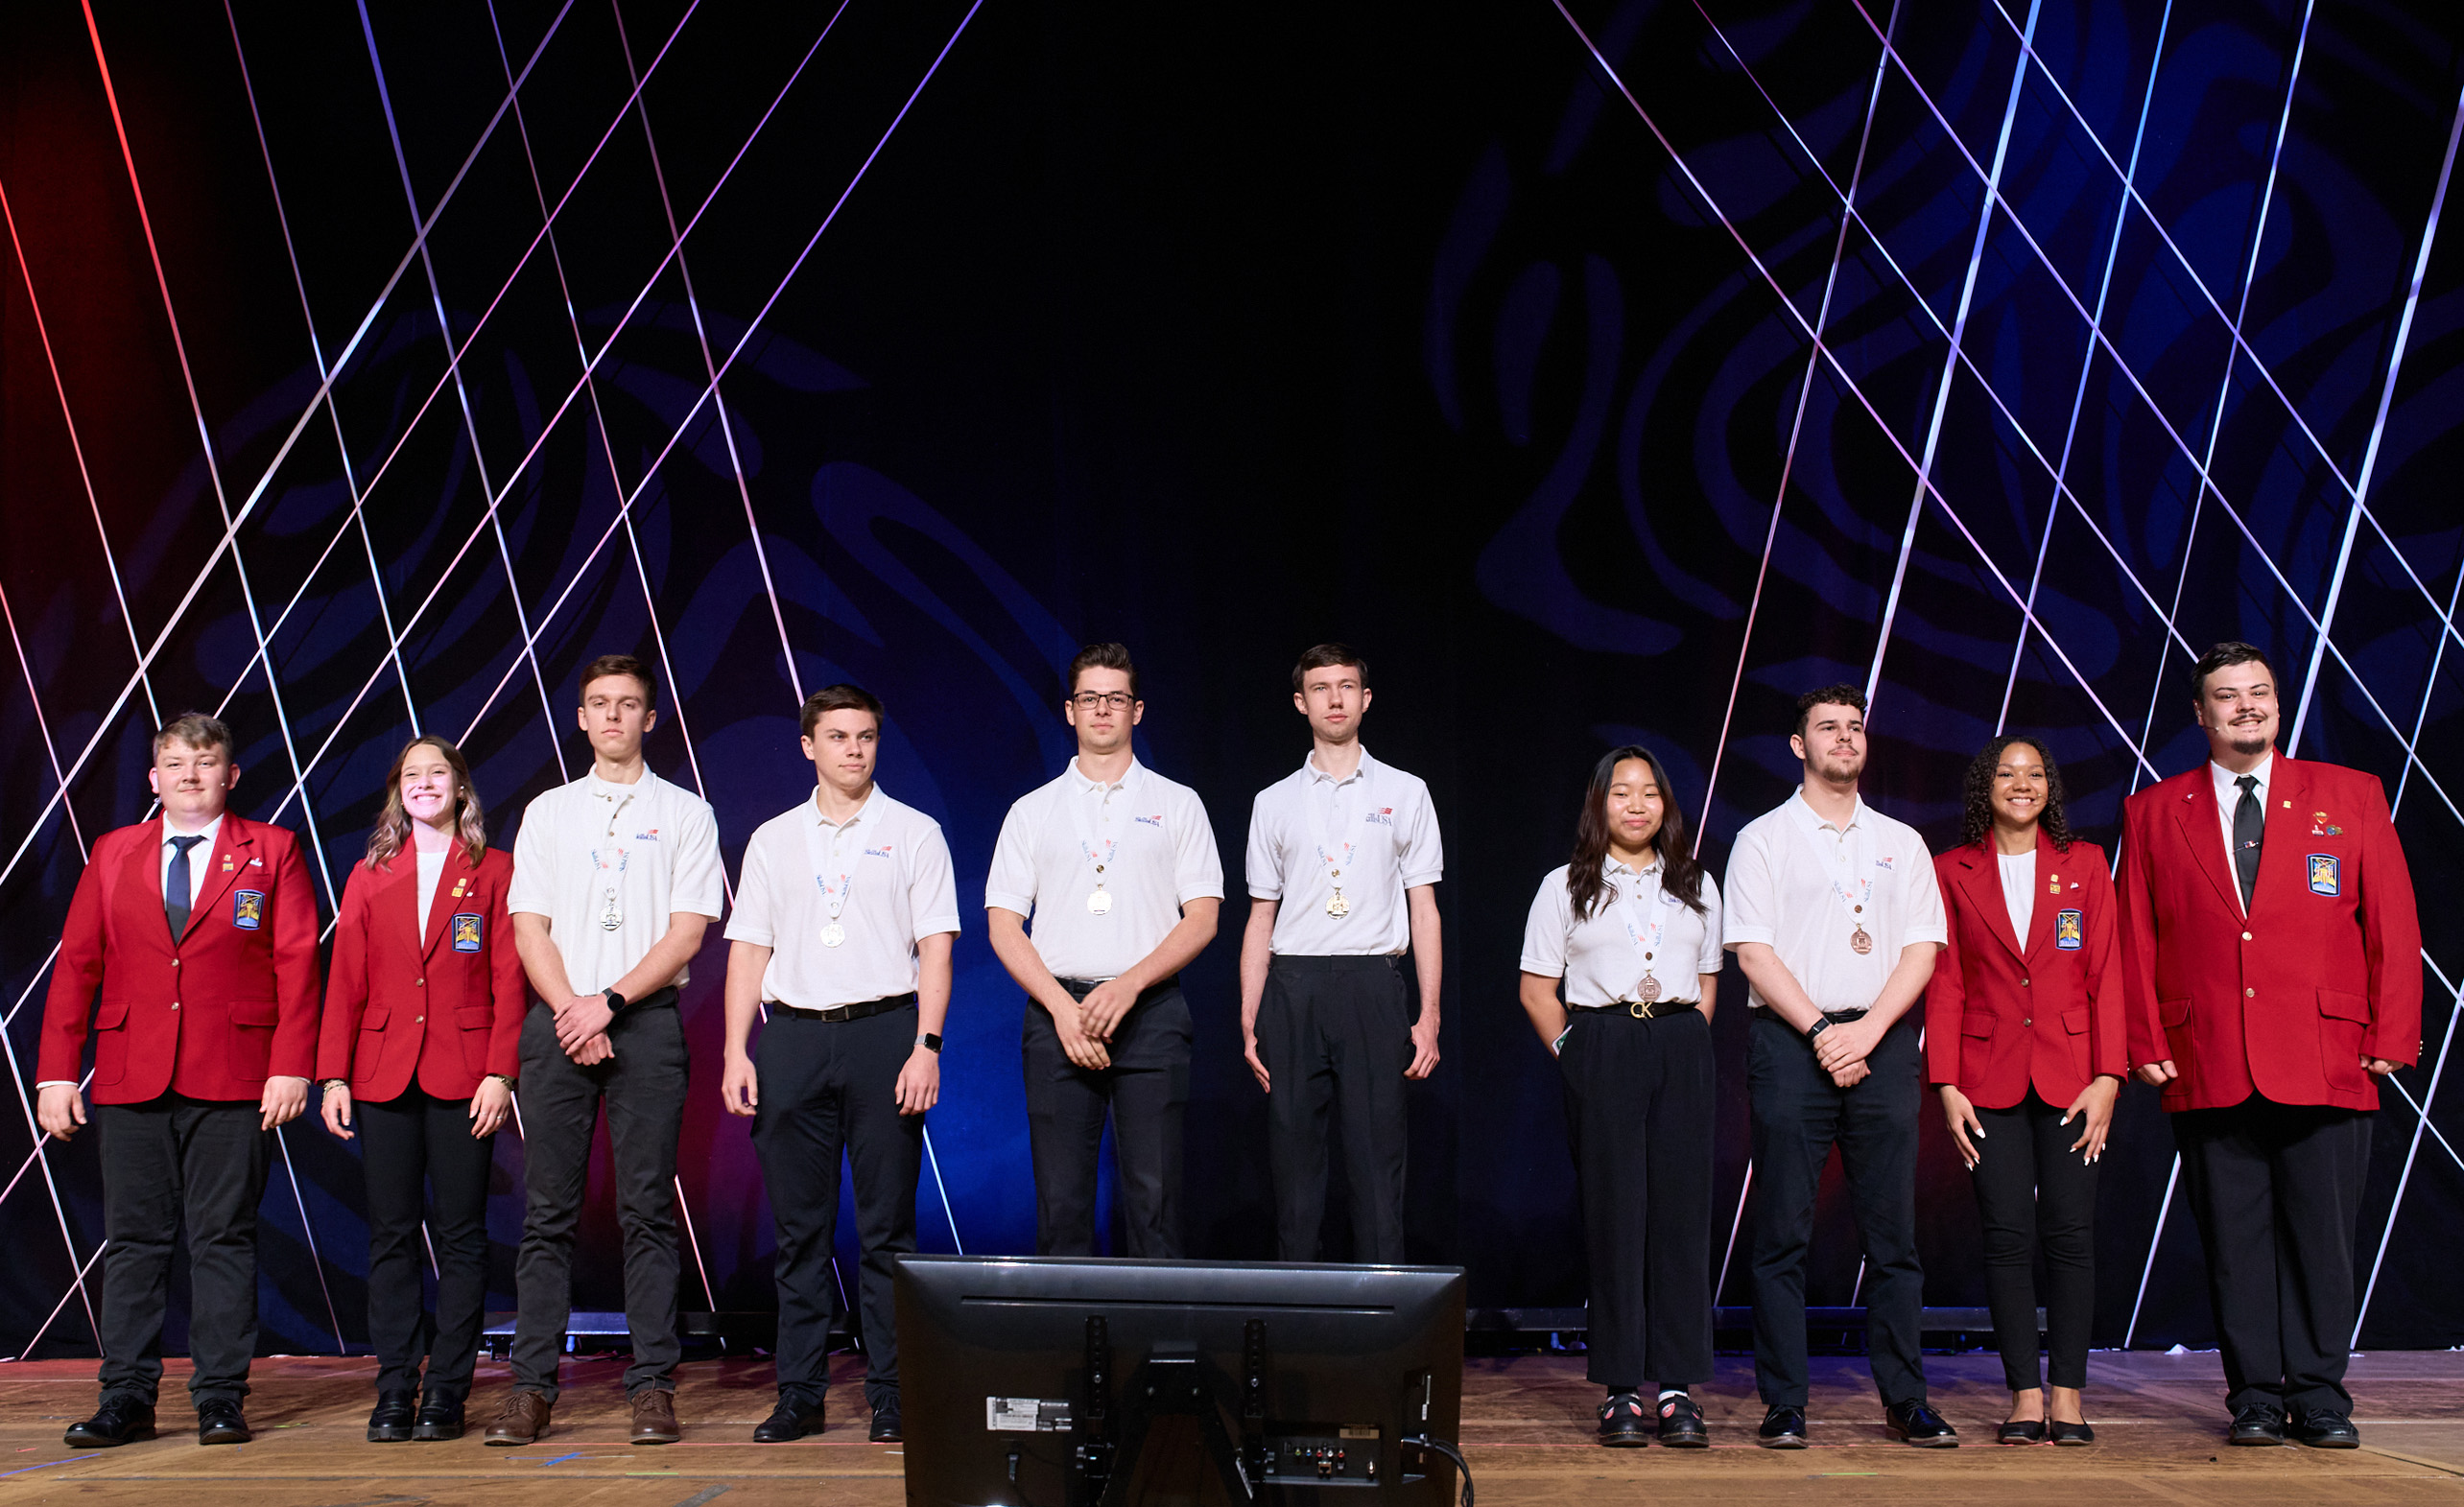 A diverse line-up of young men and women on a stage wearing white shirts, black pants and some with red jackets. 